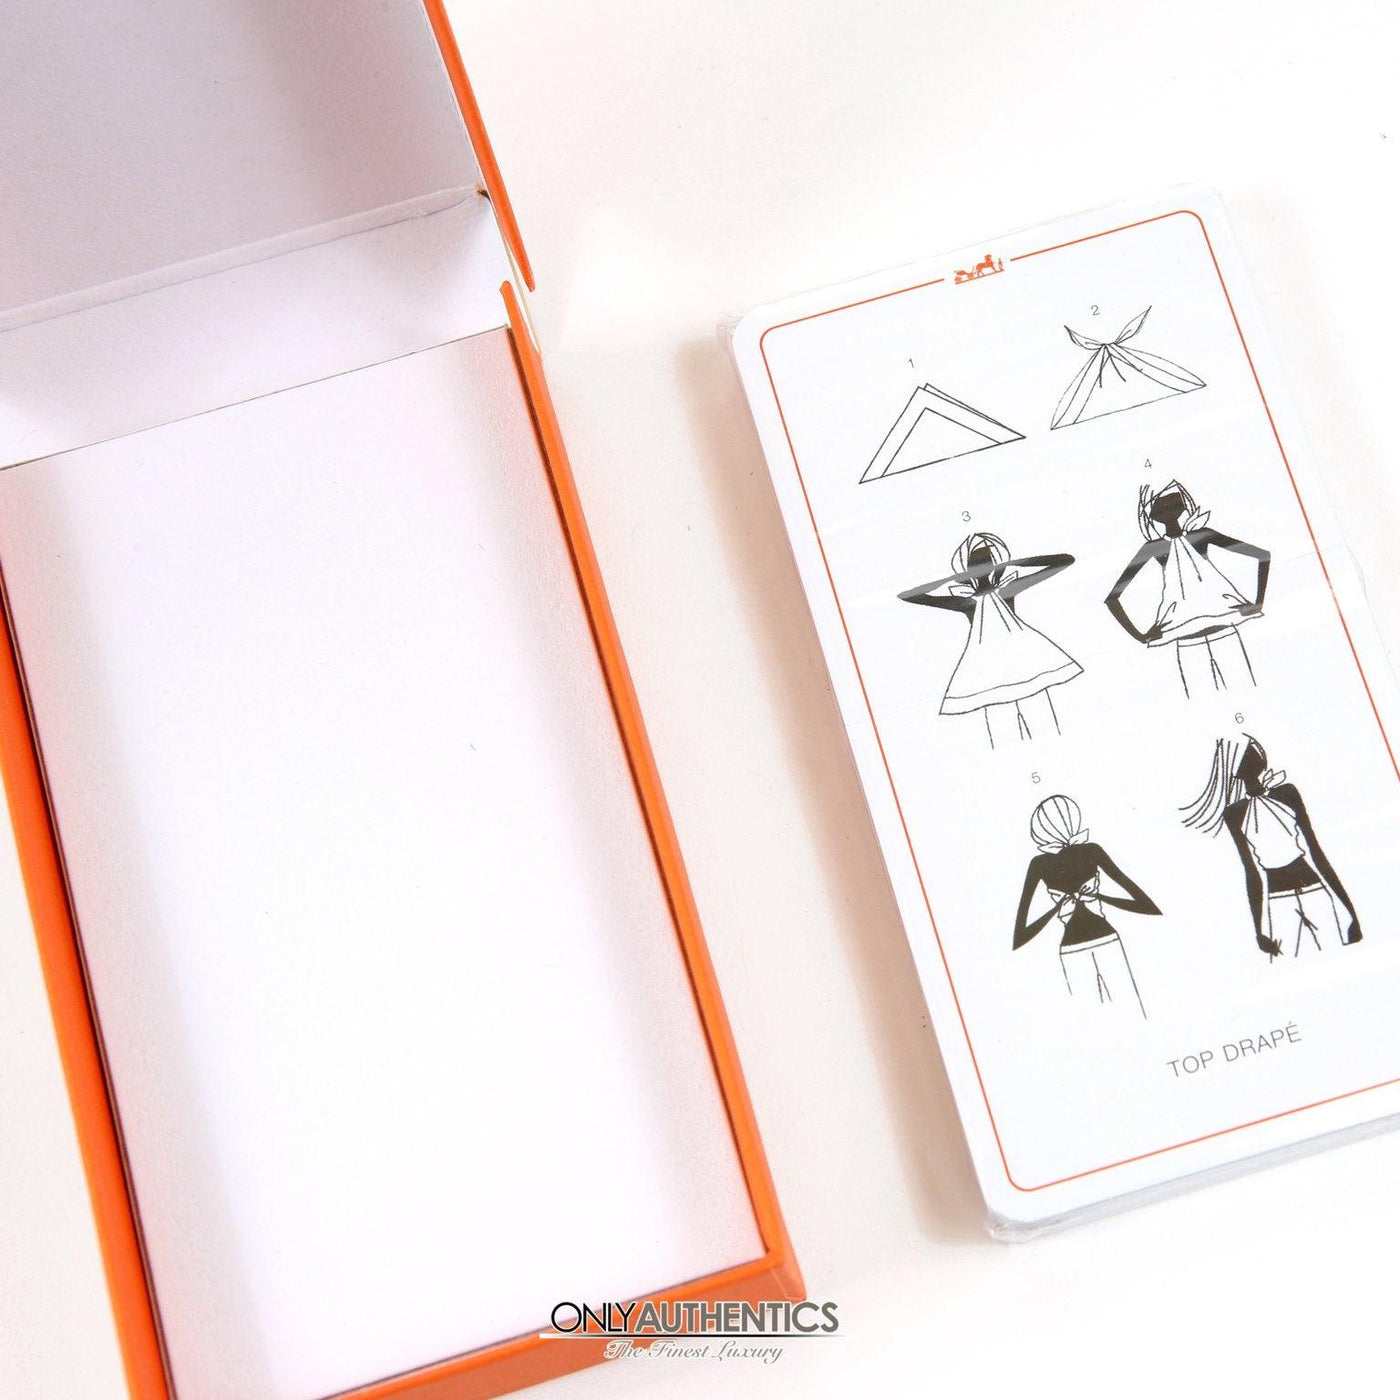 Hermès Scarf Knotting Cards - Only Authentics